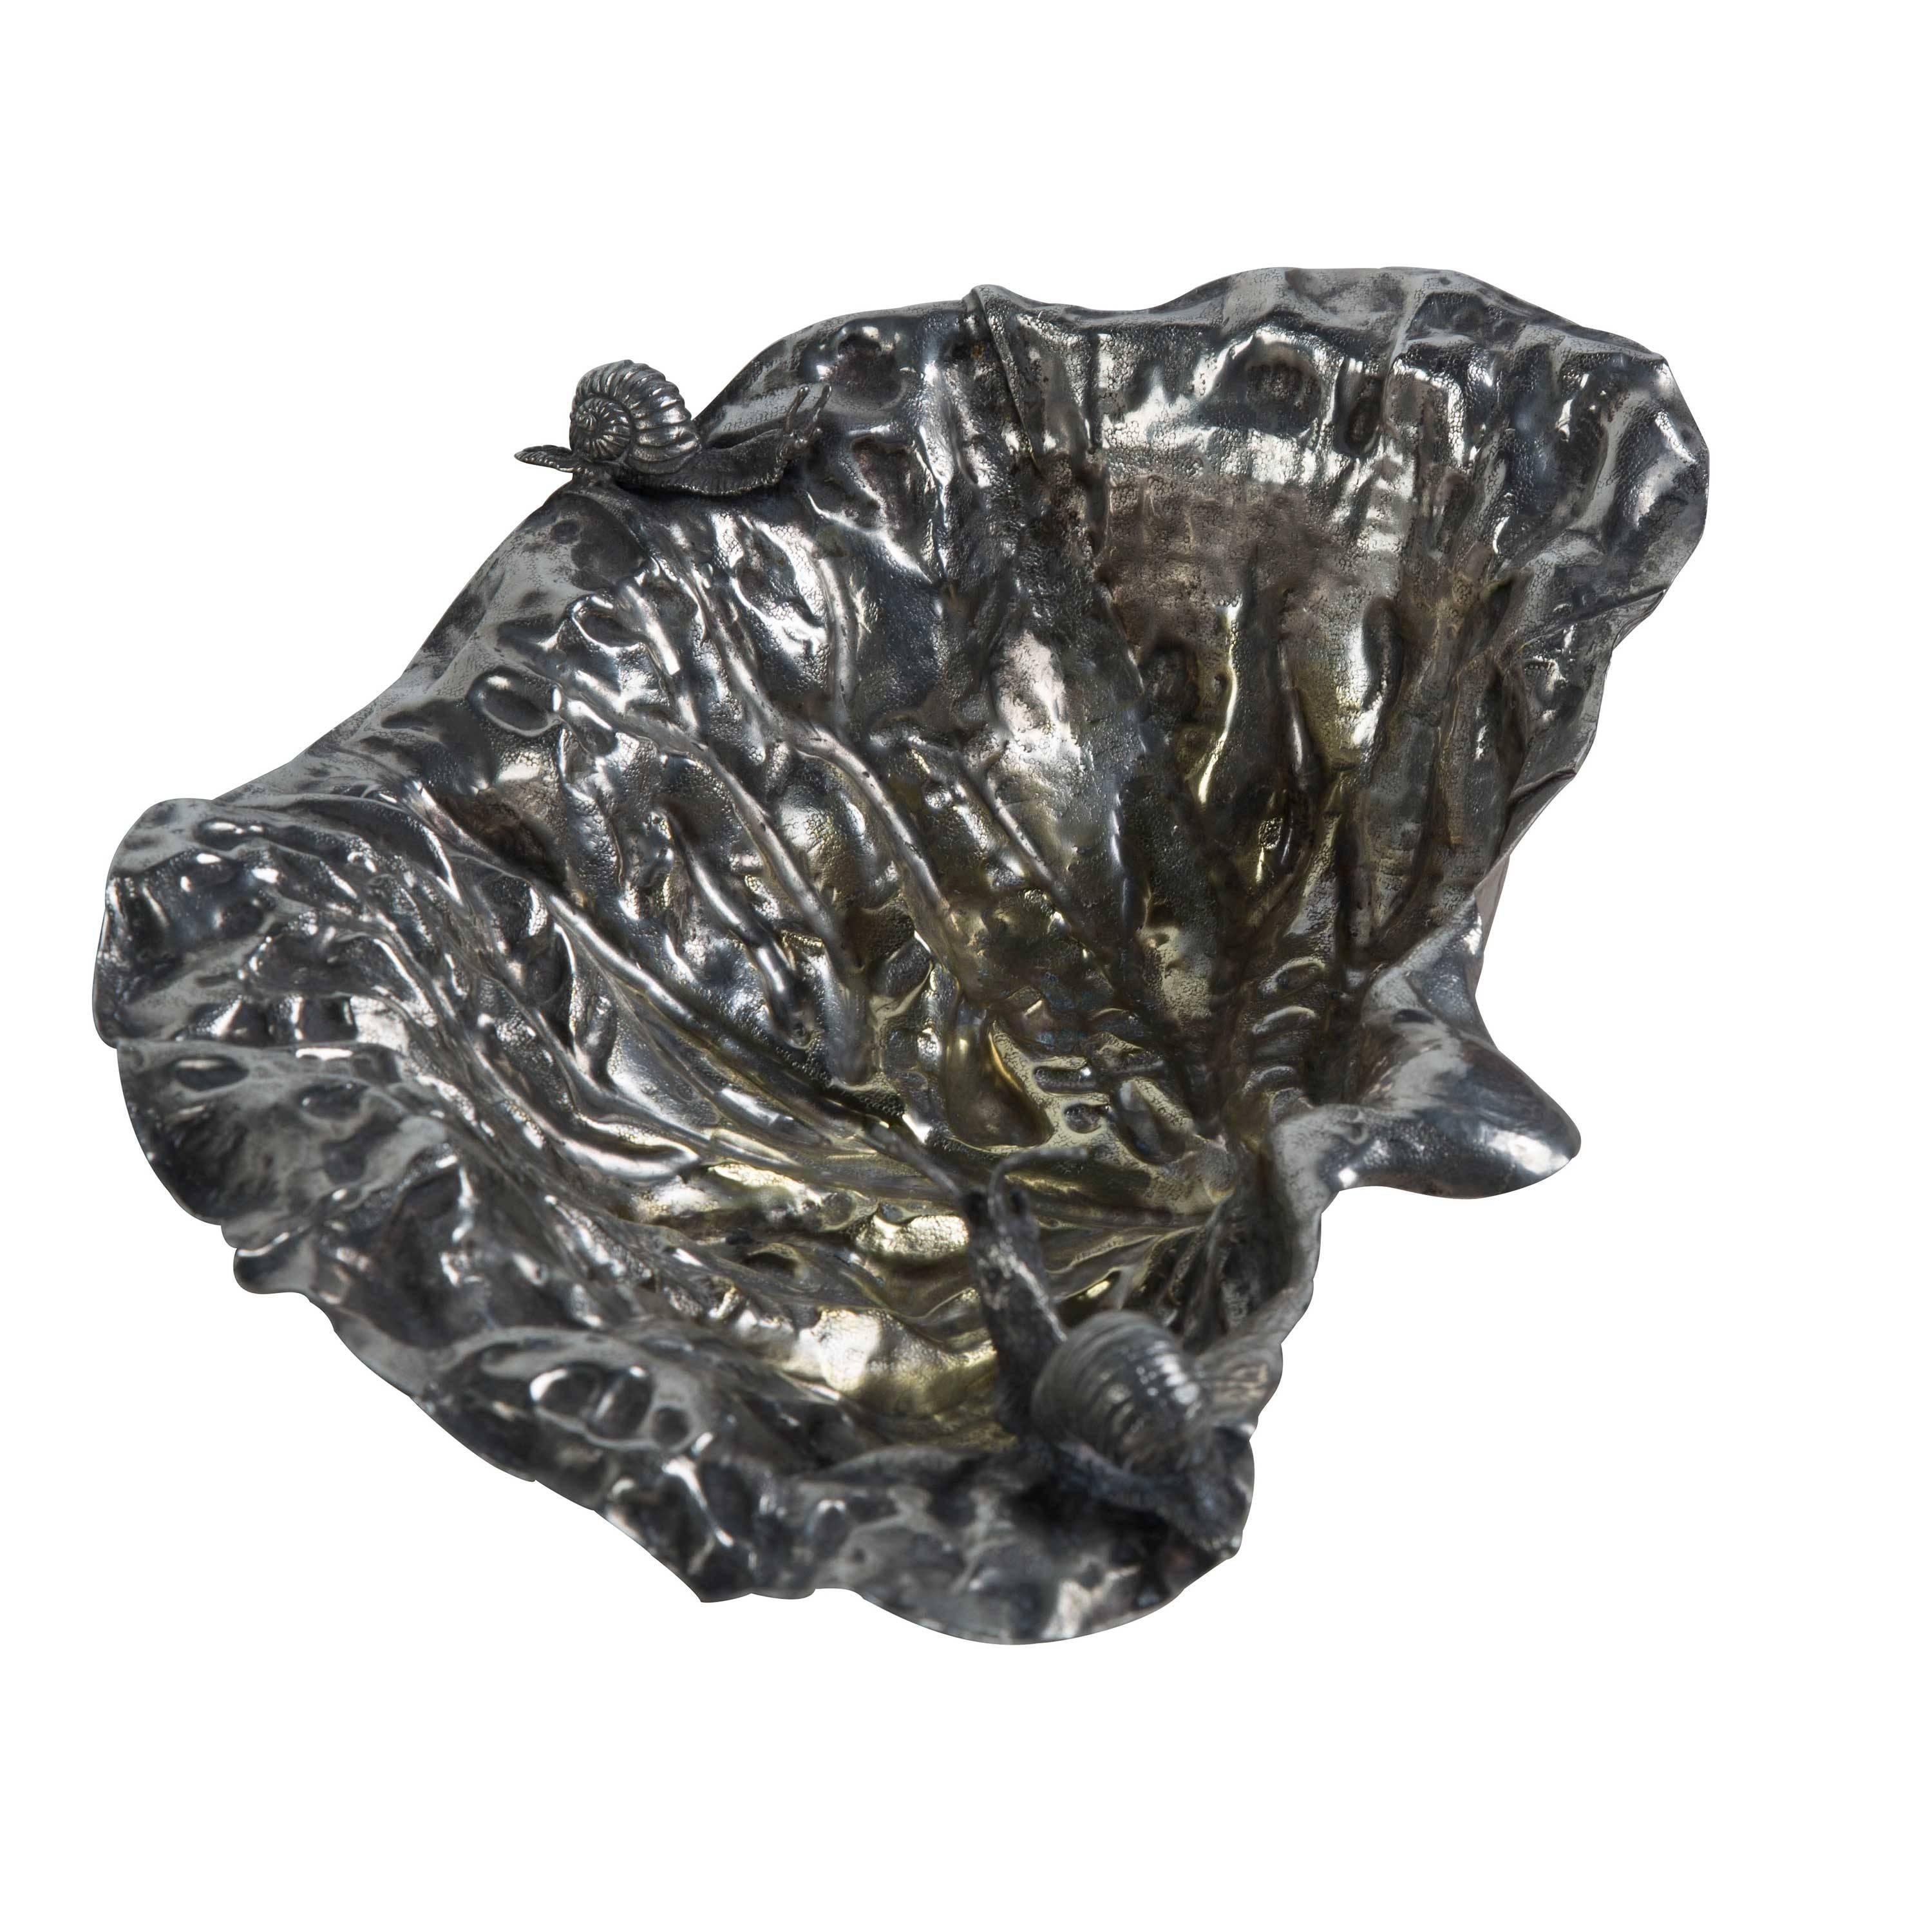 Mid-Century Modern Leaf Bowl with Snails Designed by Gabriella Crespi for Christian Dior Home